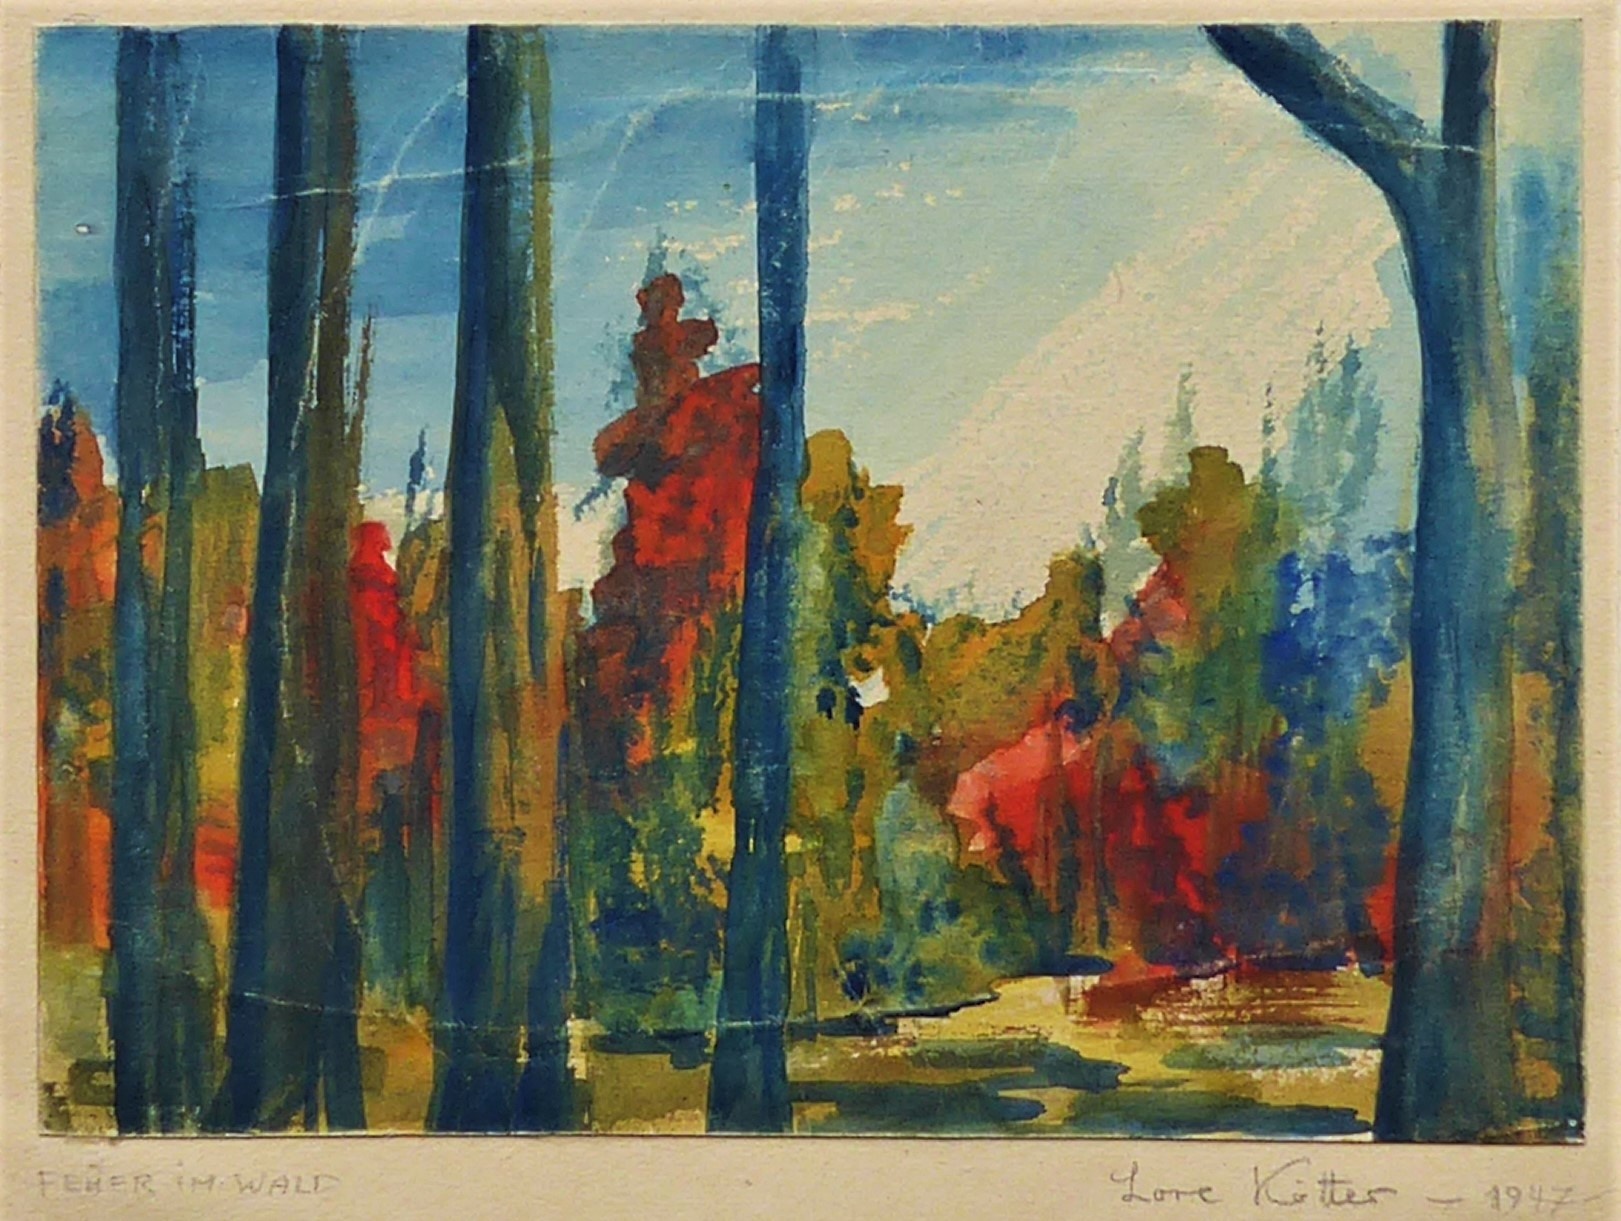 Feuer im Wald (Kunststiftung Eleonore Kötter CC BY-NC-SA)